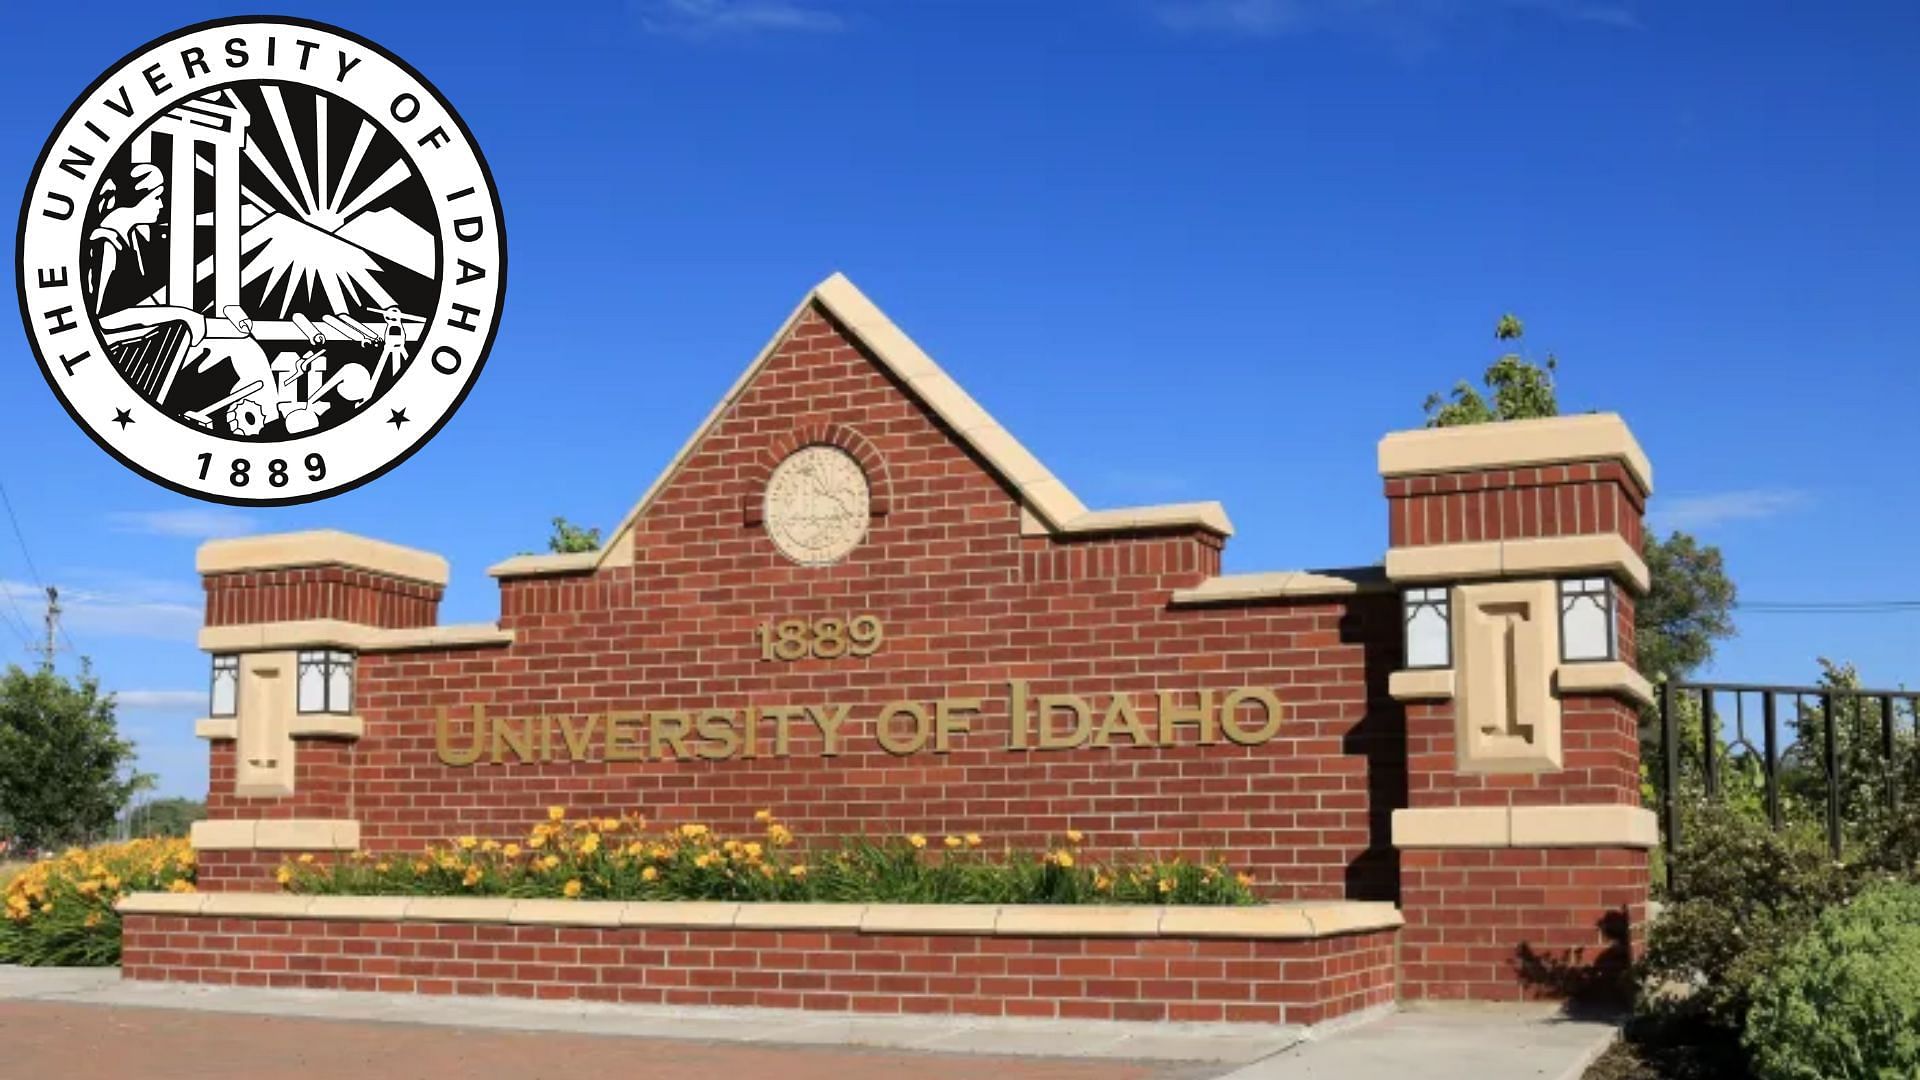 Four students found dead off University of Idaho campus (image via Getty Images/Education Images)